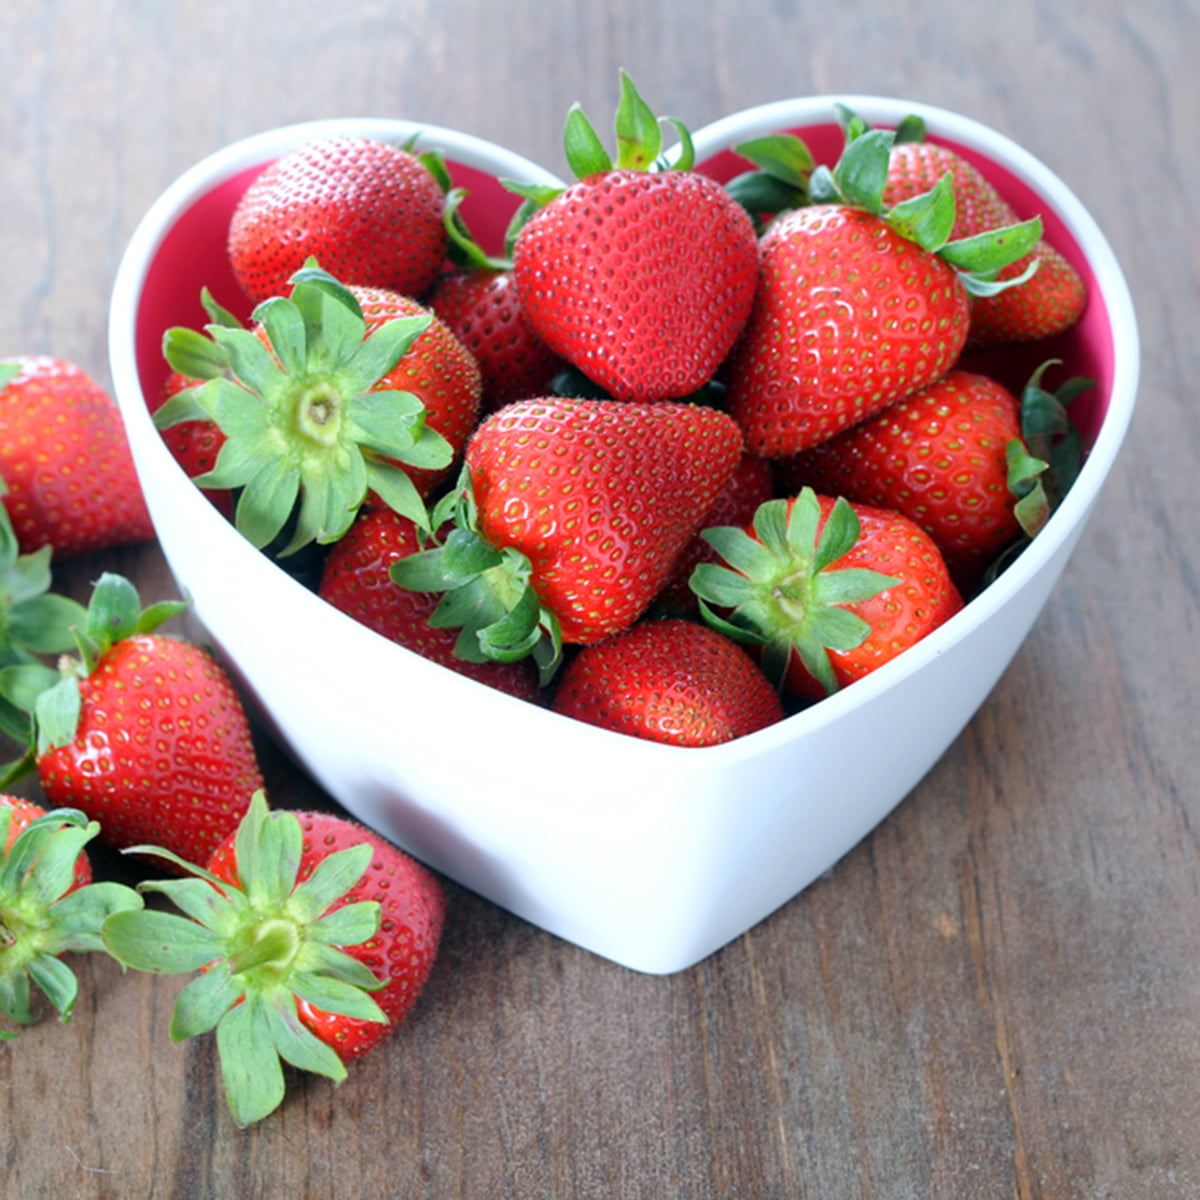 Strawberry Benefits for heart